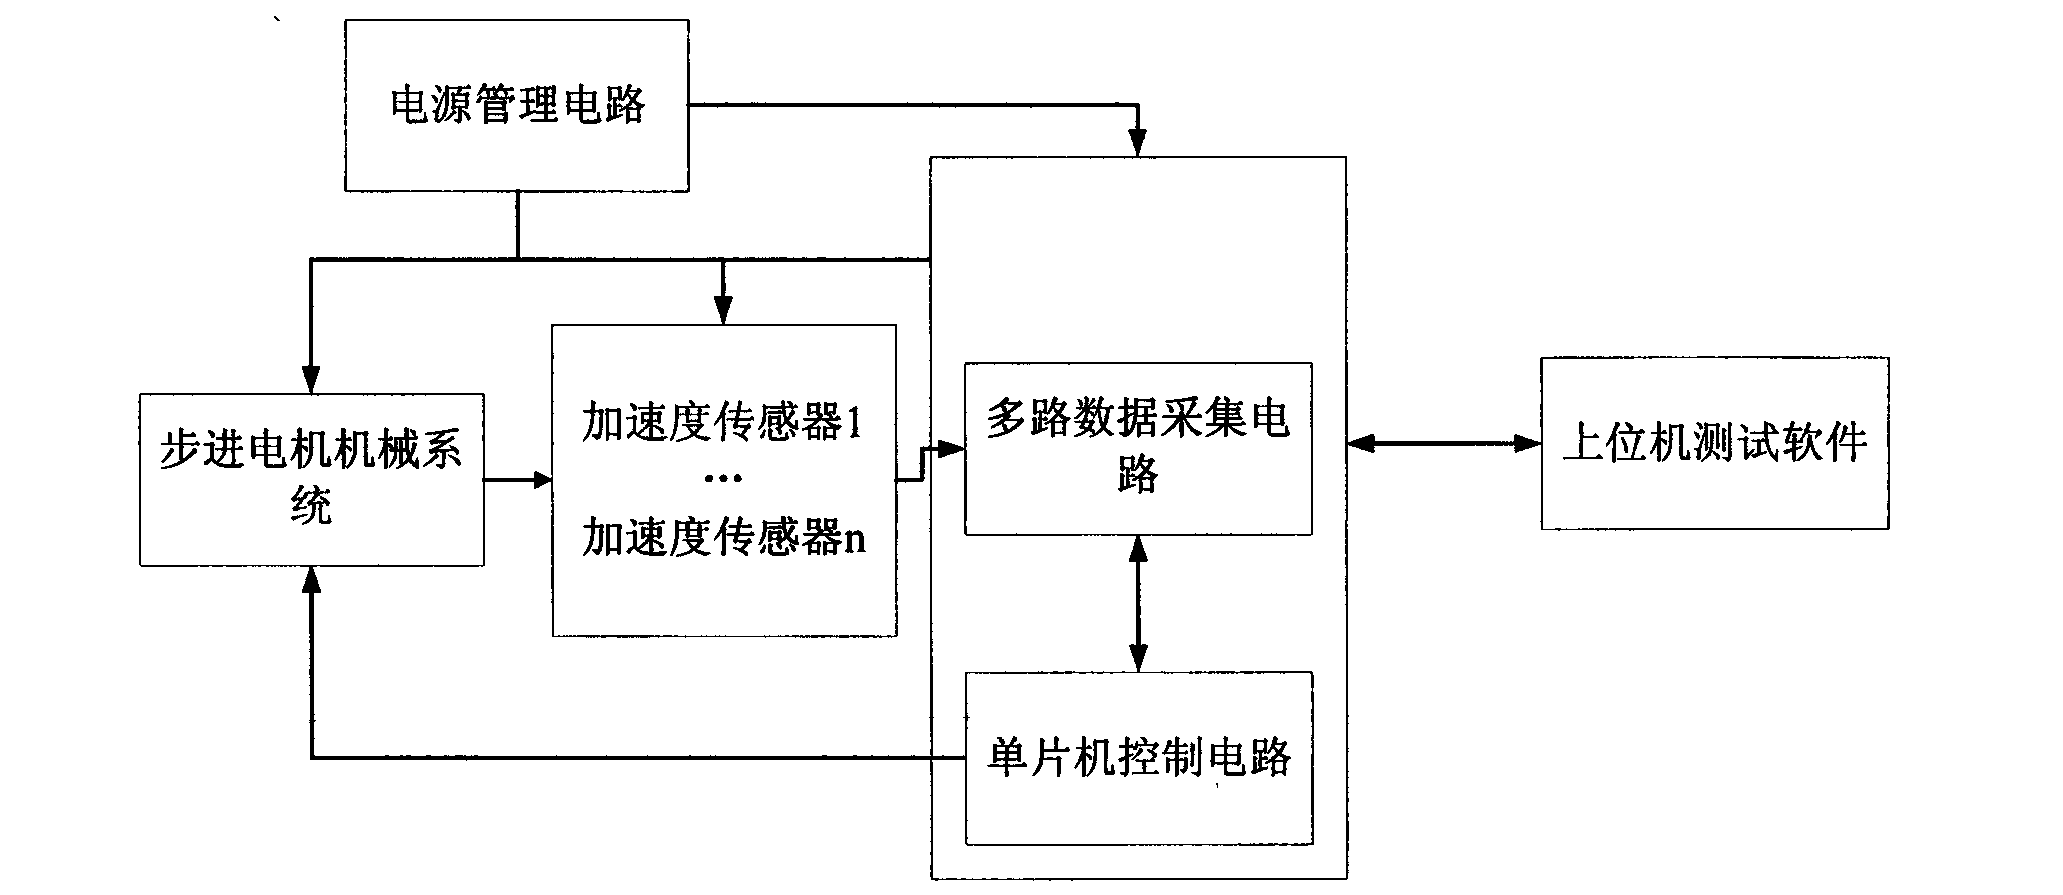 Zero offset test compensation system of multi-channel capacitor type MEMS (micro-electromechanical system) acceleration sensor